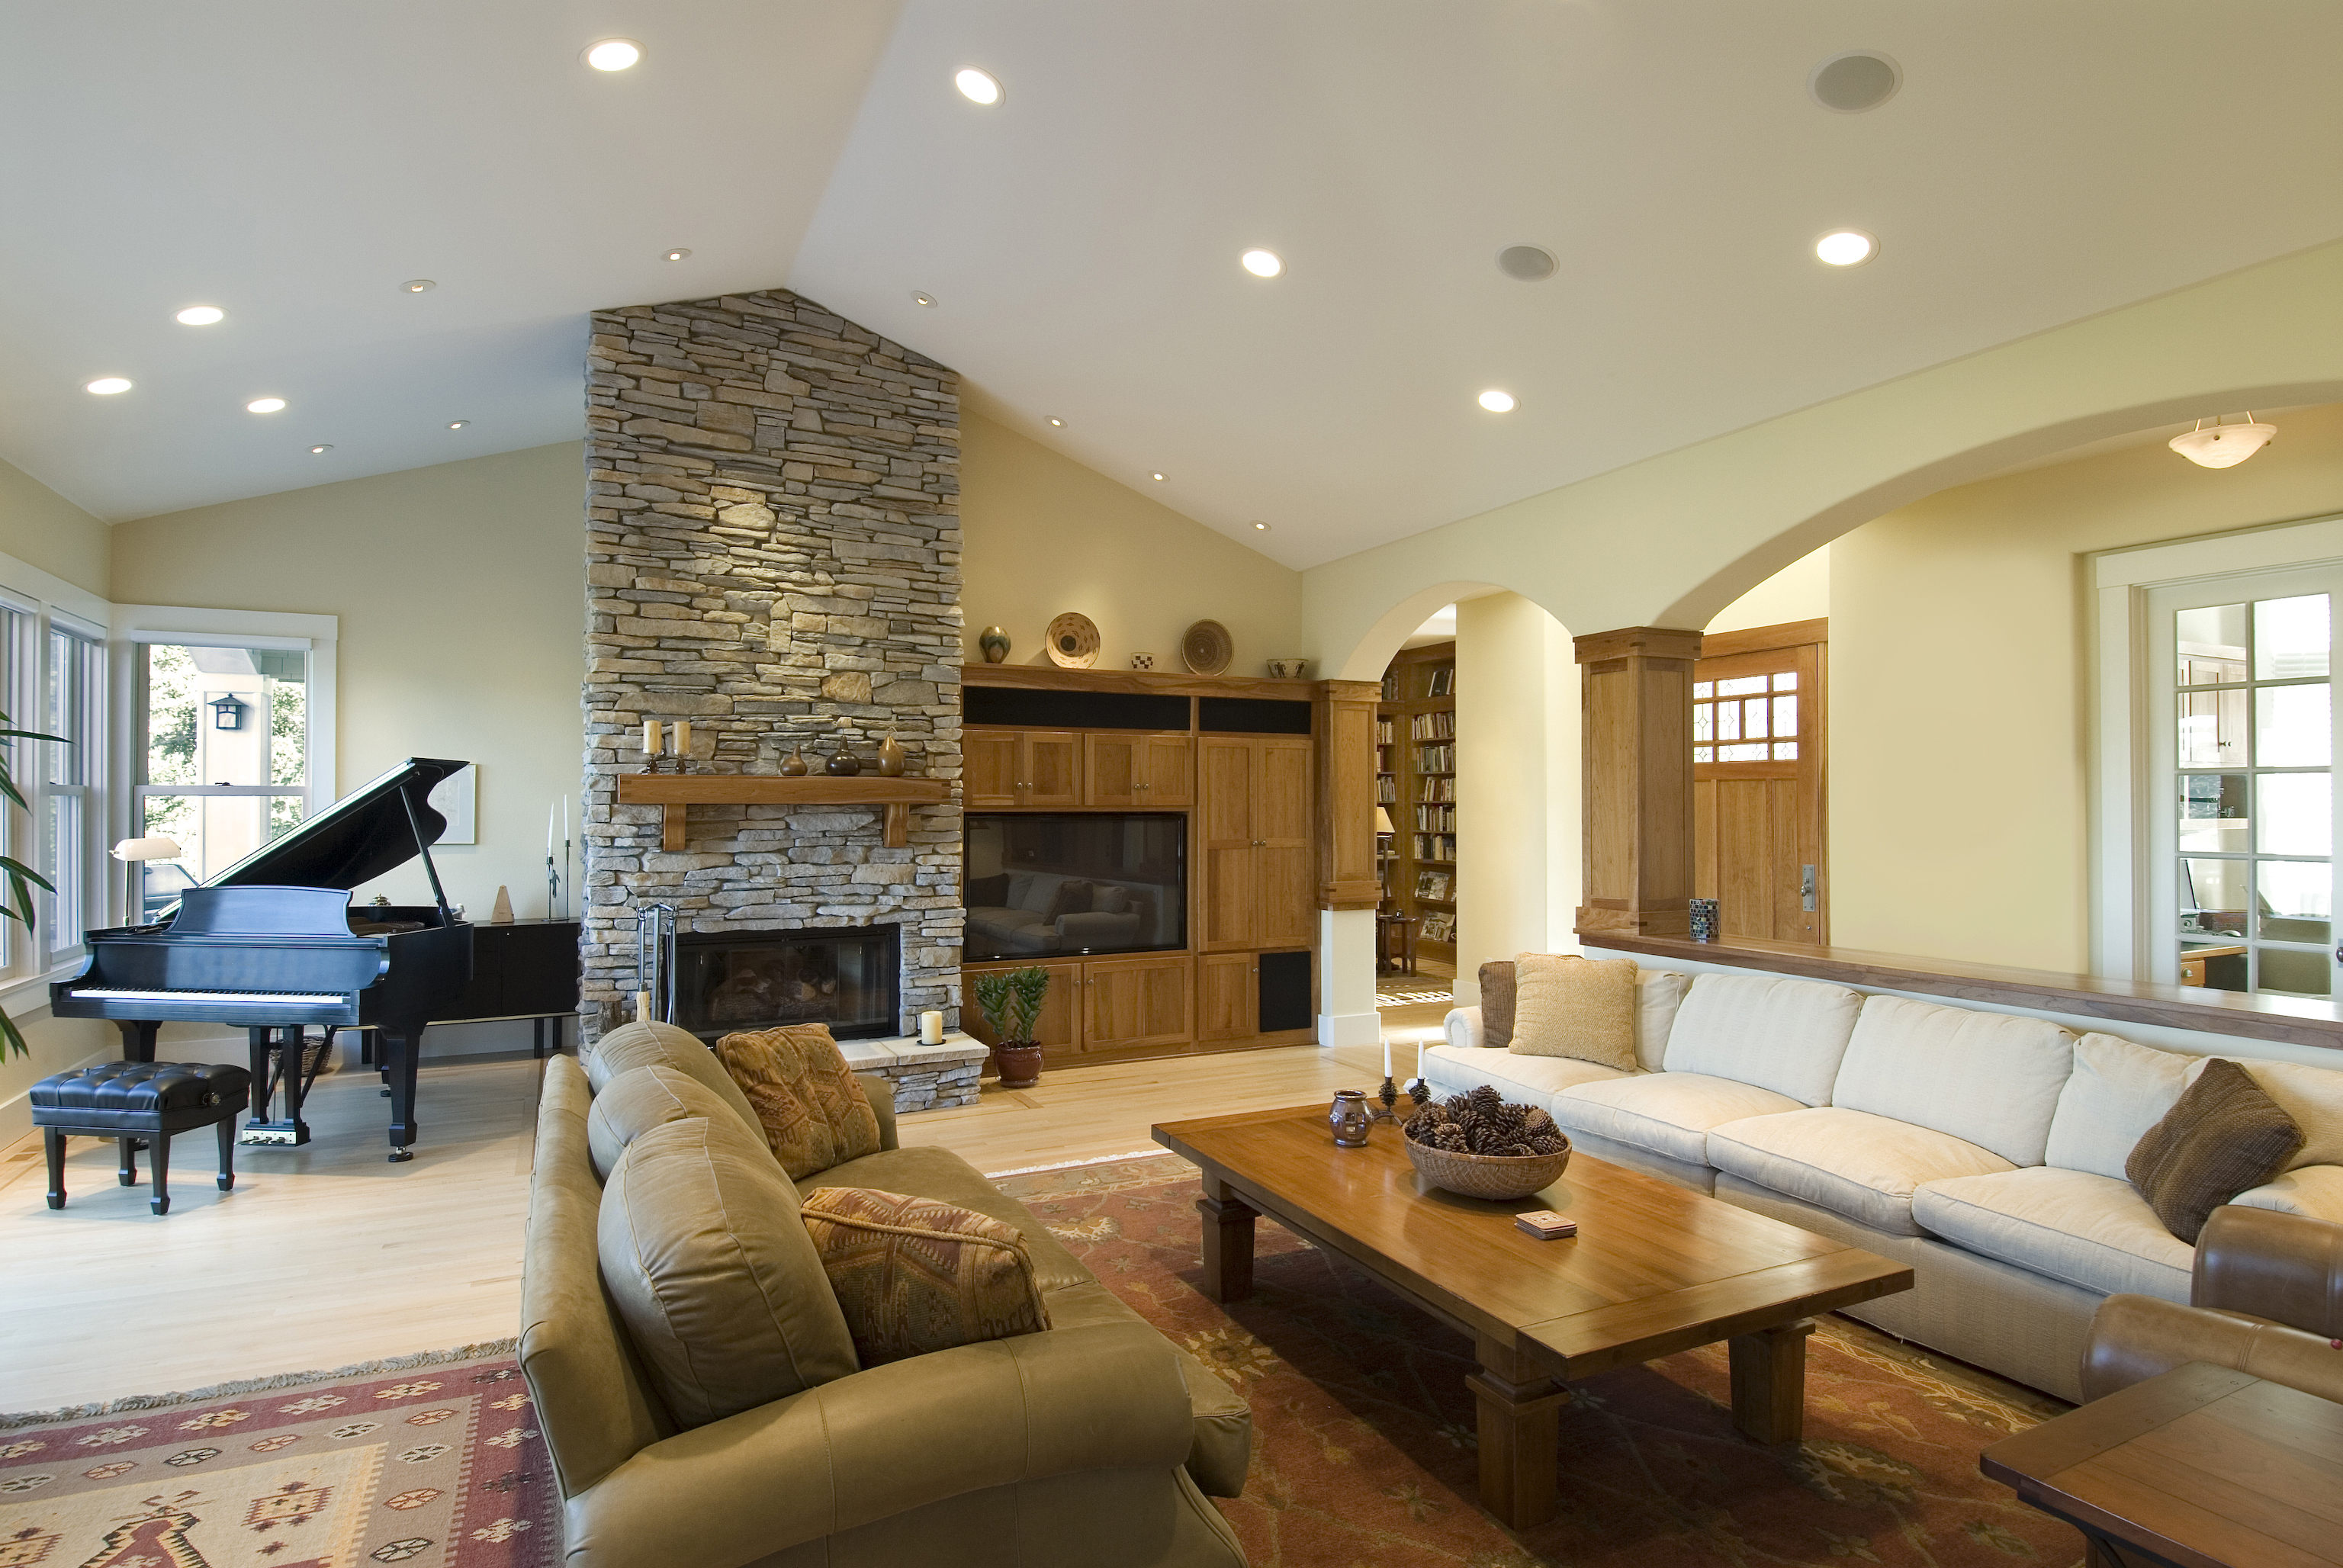 15 solutions to awkward living room layout with a fireplace that work pretty well